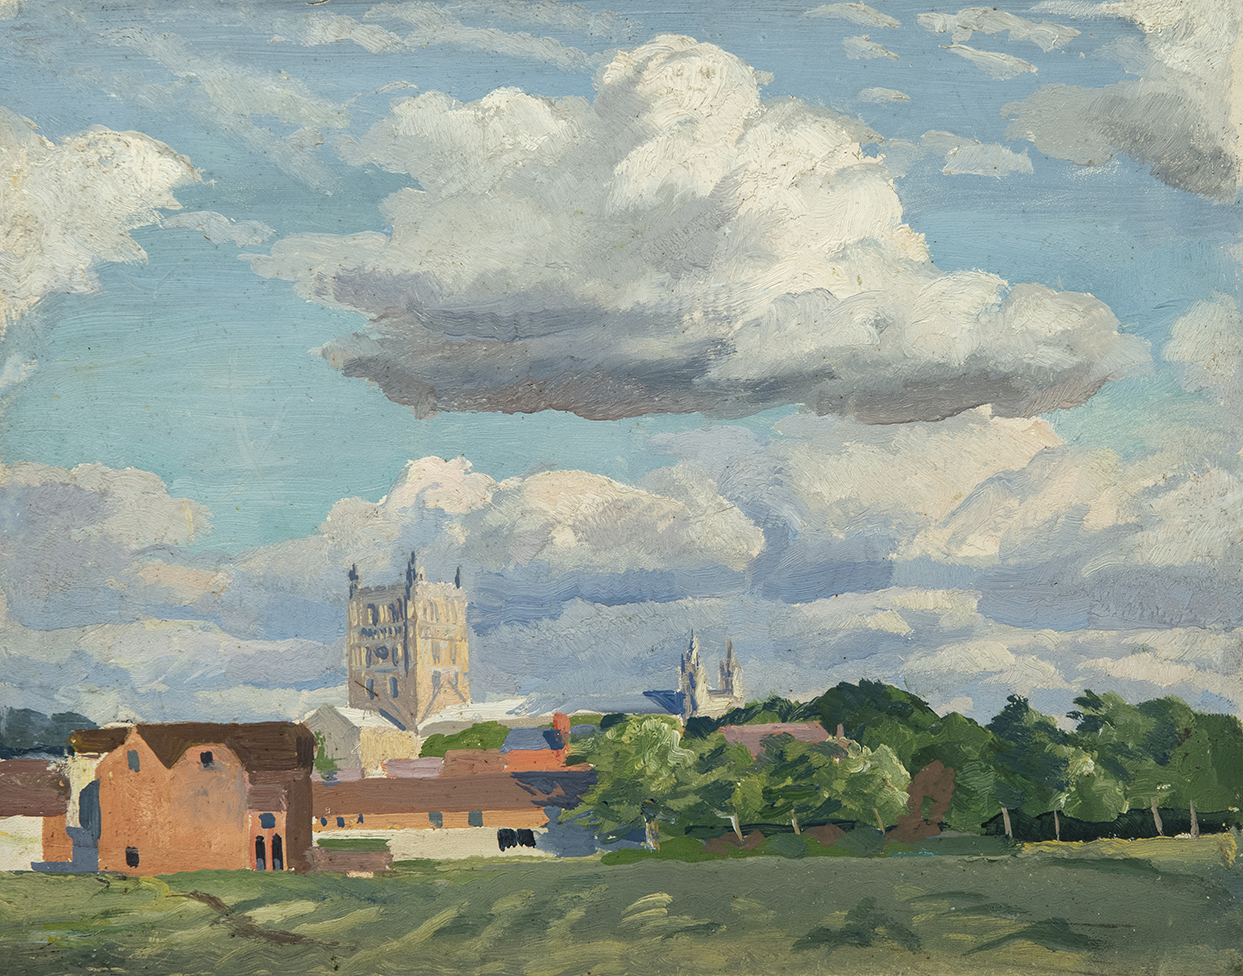 Landscape with church and cumulus clouds by Stephen Bone